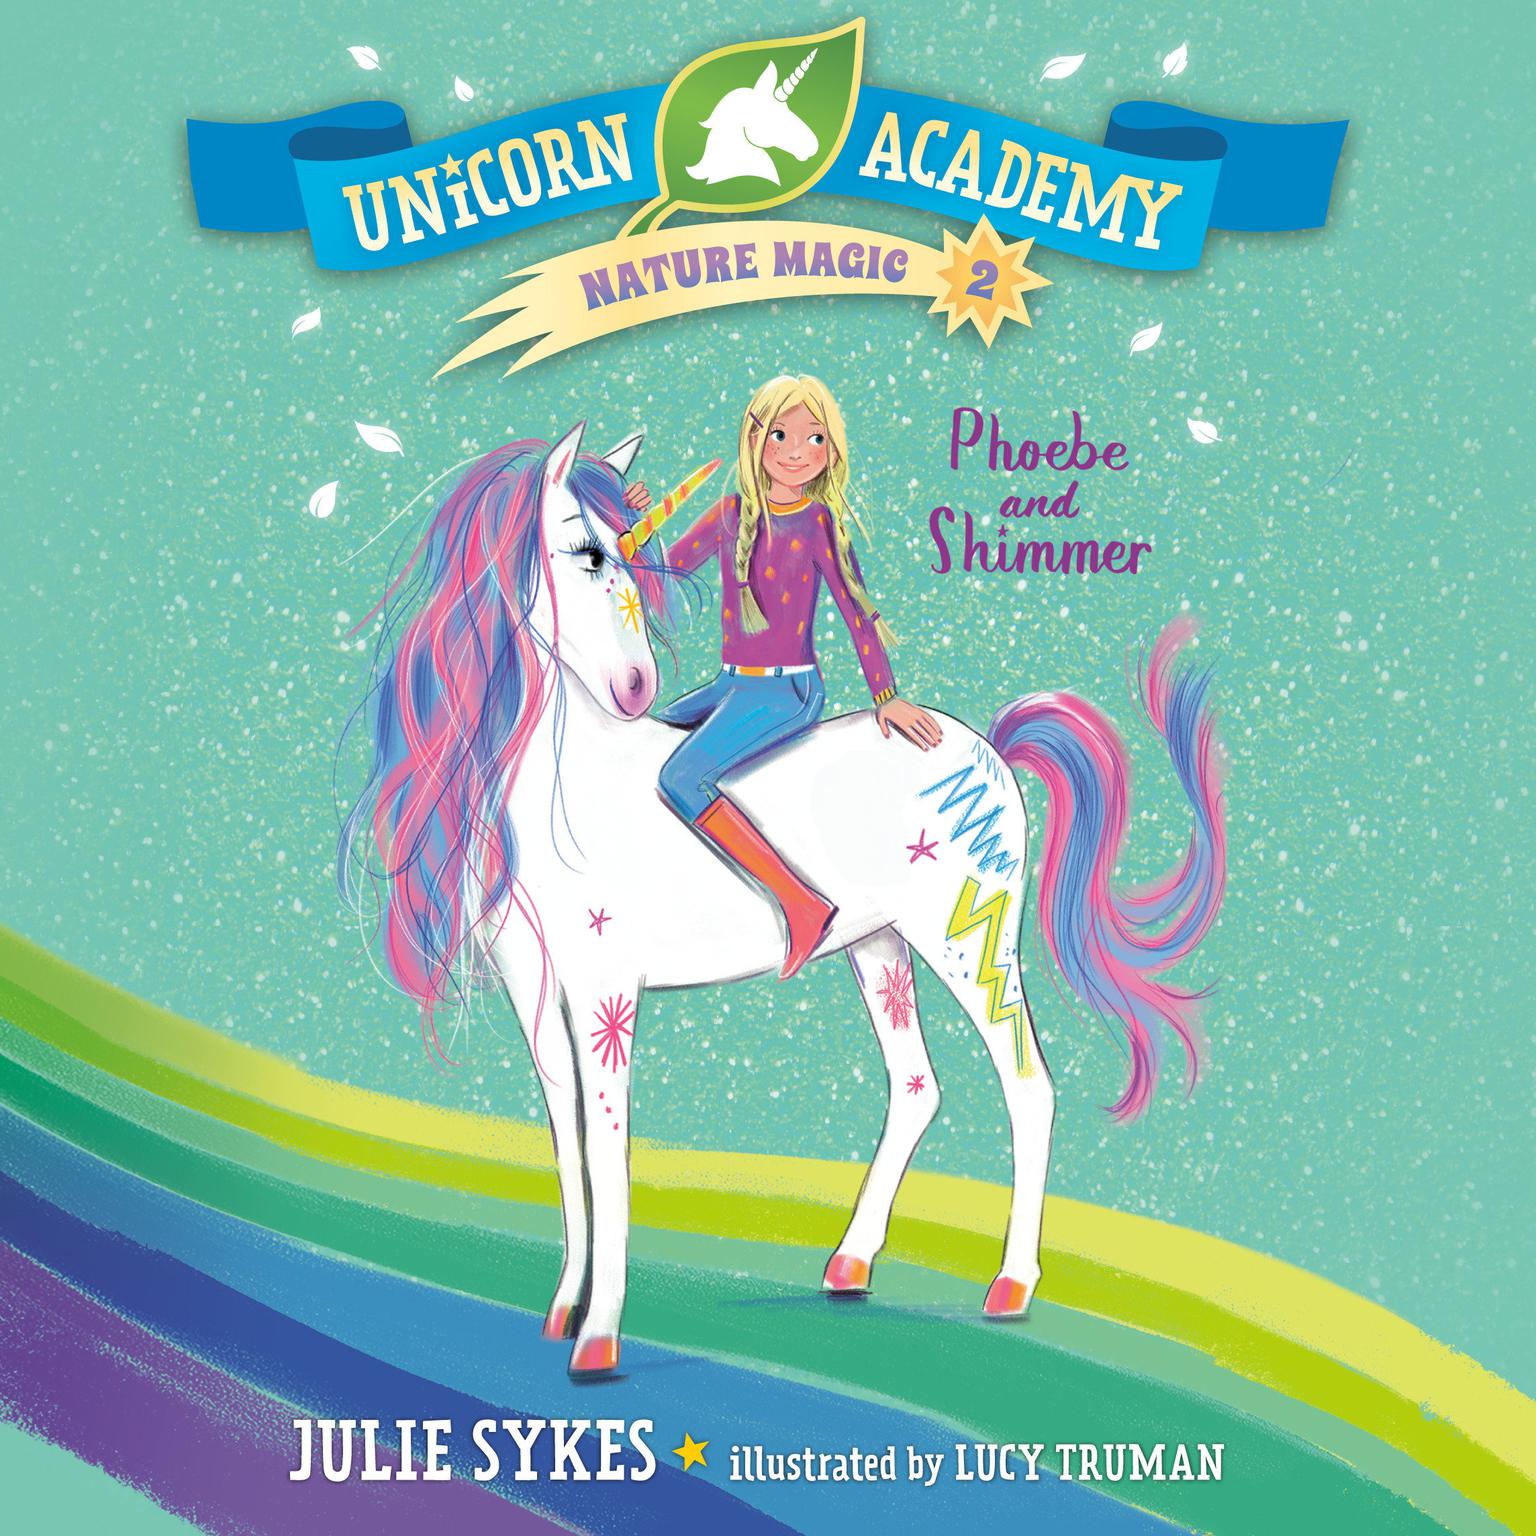 Unicorn Academy Nature Magic #2: Phoebe and Shimmer Audiobook, by Julie Sykes